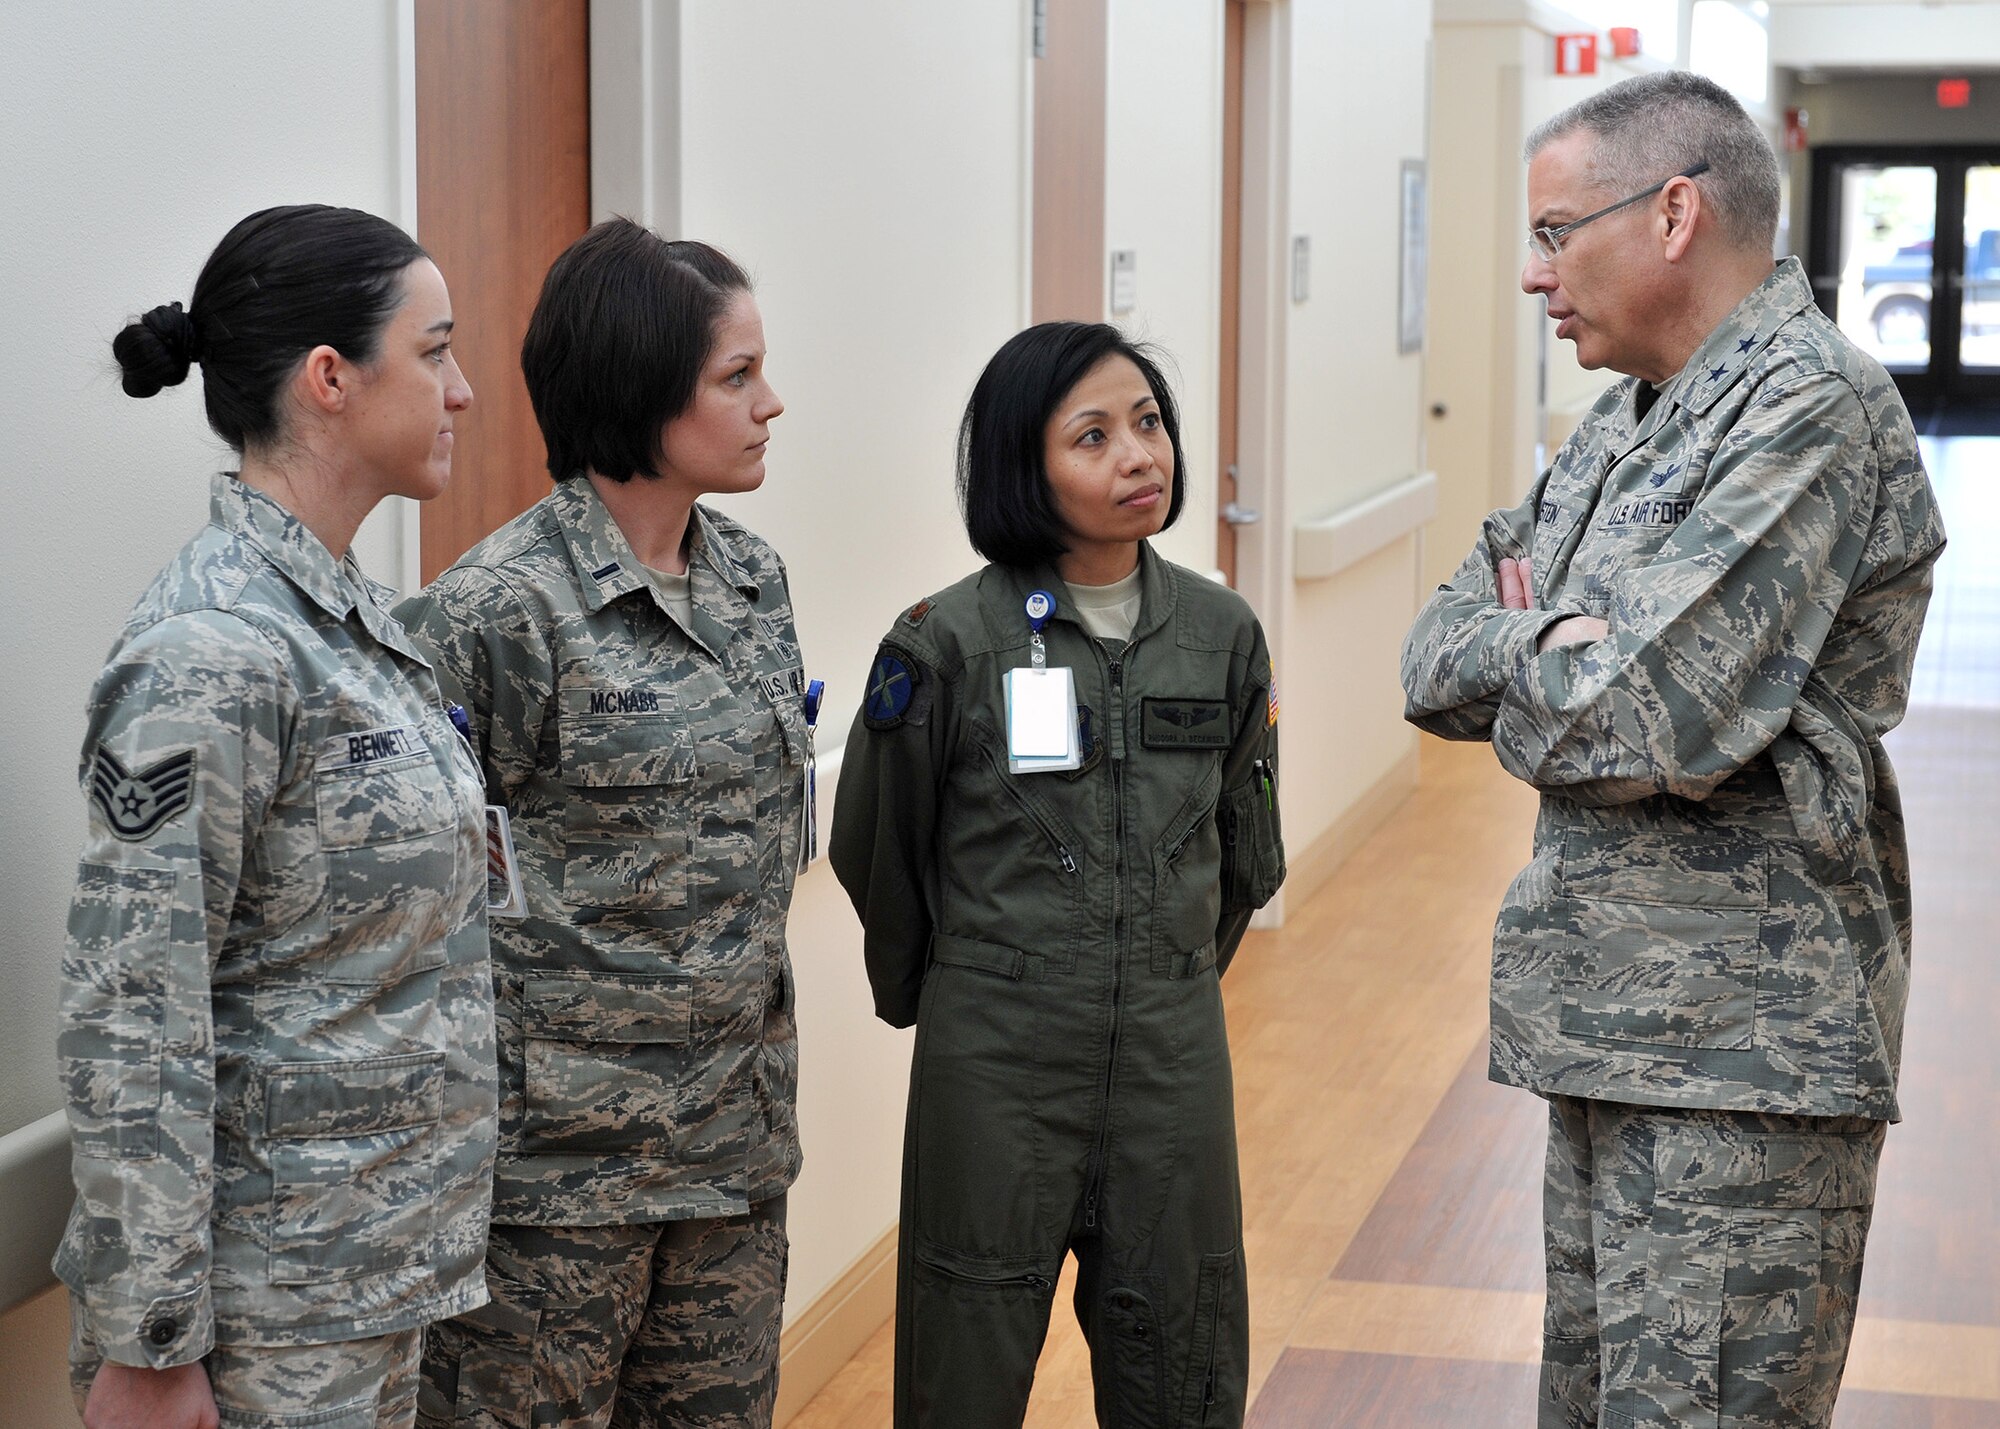 Maj. Gen. Jack Weinstein, 20th Air Force commander (right), recognizes members of the 341st Medical Group’s mental health staff for superior performance during his tour of the Malmstrom Air Force Base clinic April 1. Pictured (from right to left) are Maj. Rhodora Beckinger, 341st Medical Operations Squadron flight surgeon; 1st Lt. Morgan McNabb, 341st MDOS staff social worker; and Staff Sgt. Brooke Bennett, 341st MDOS NCO in charge of the mental health clinic. (U.S. Air Force photo / John Turner)